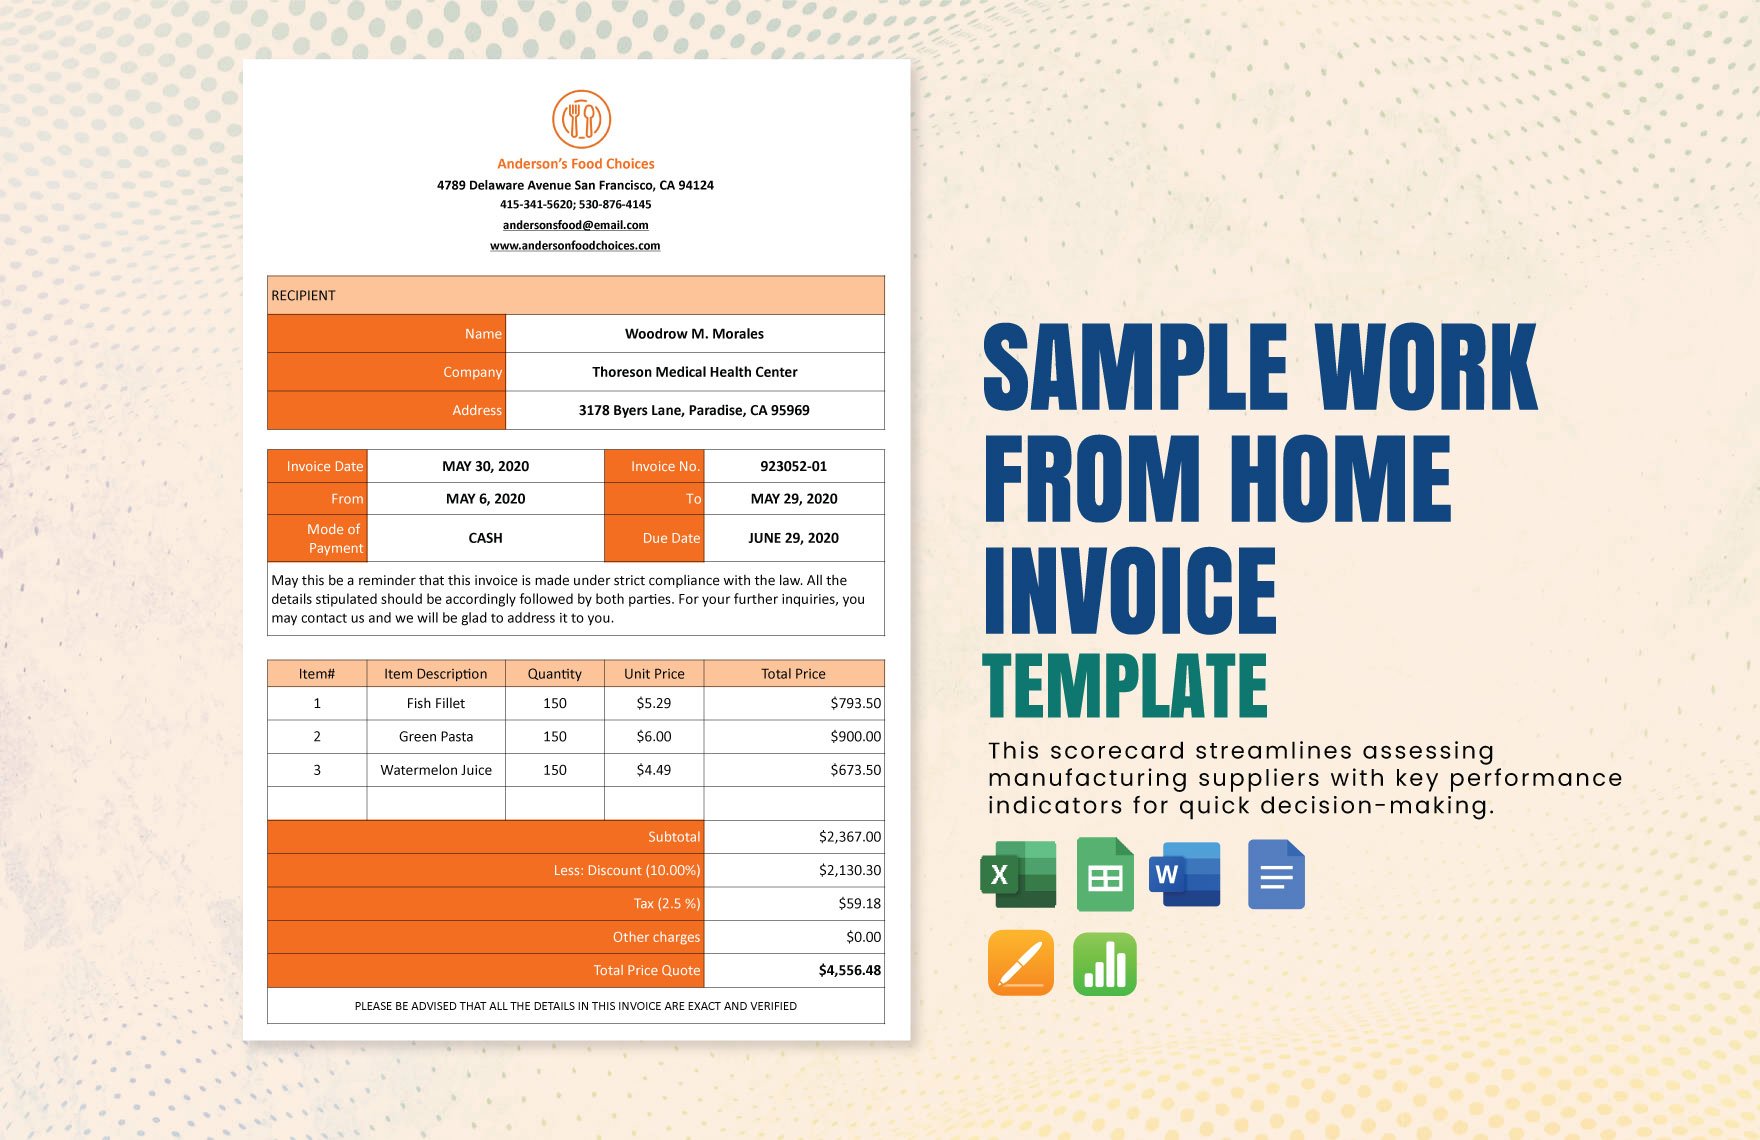 Sample Work From Home Invoice Template